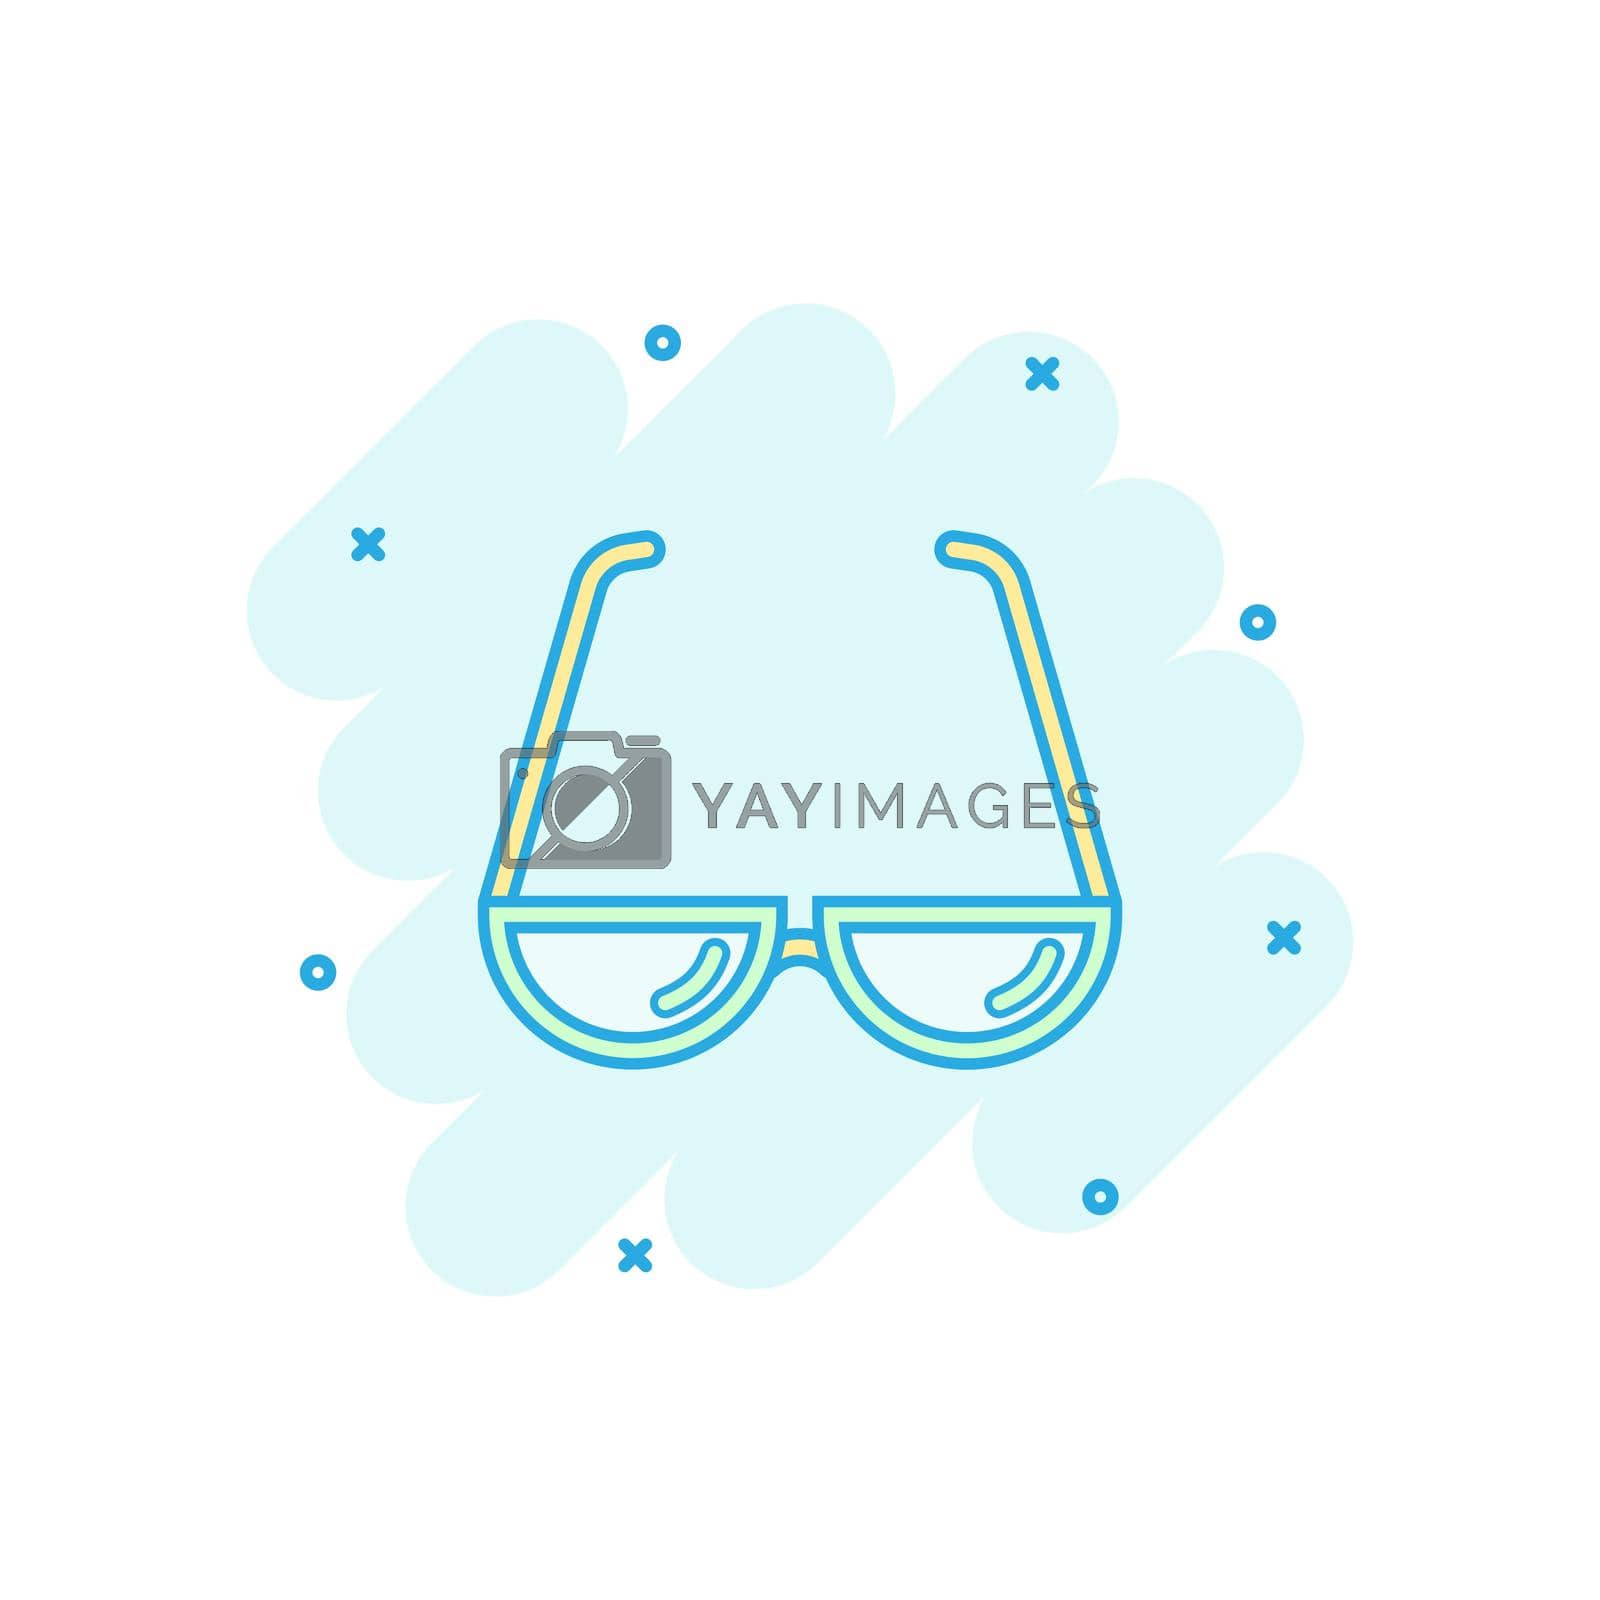 Royalty free image of Vector cartoon sunglasses icon in comic style. Eyewear sign illustration pictogram. Sunglasses business splash effect concept. by LysenkoA